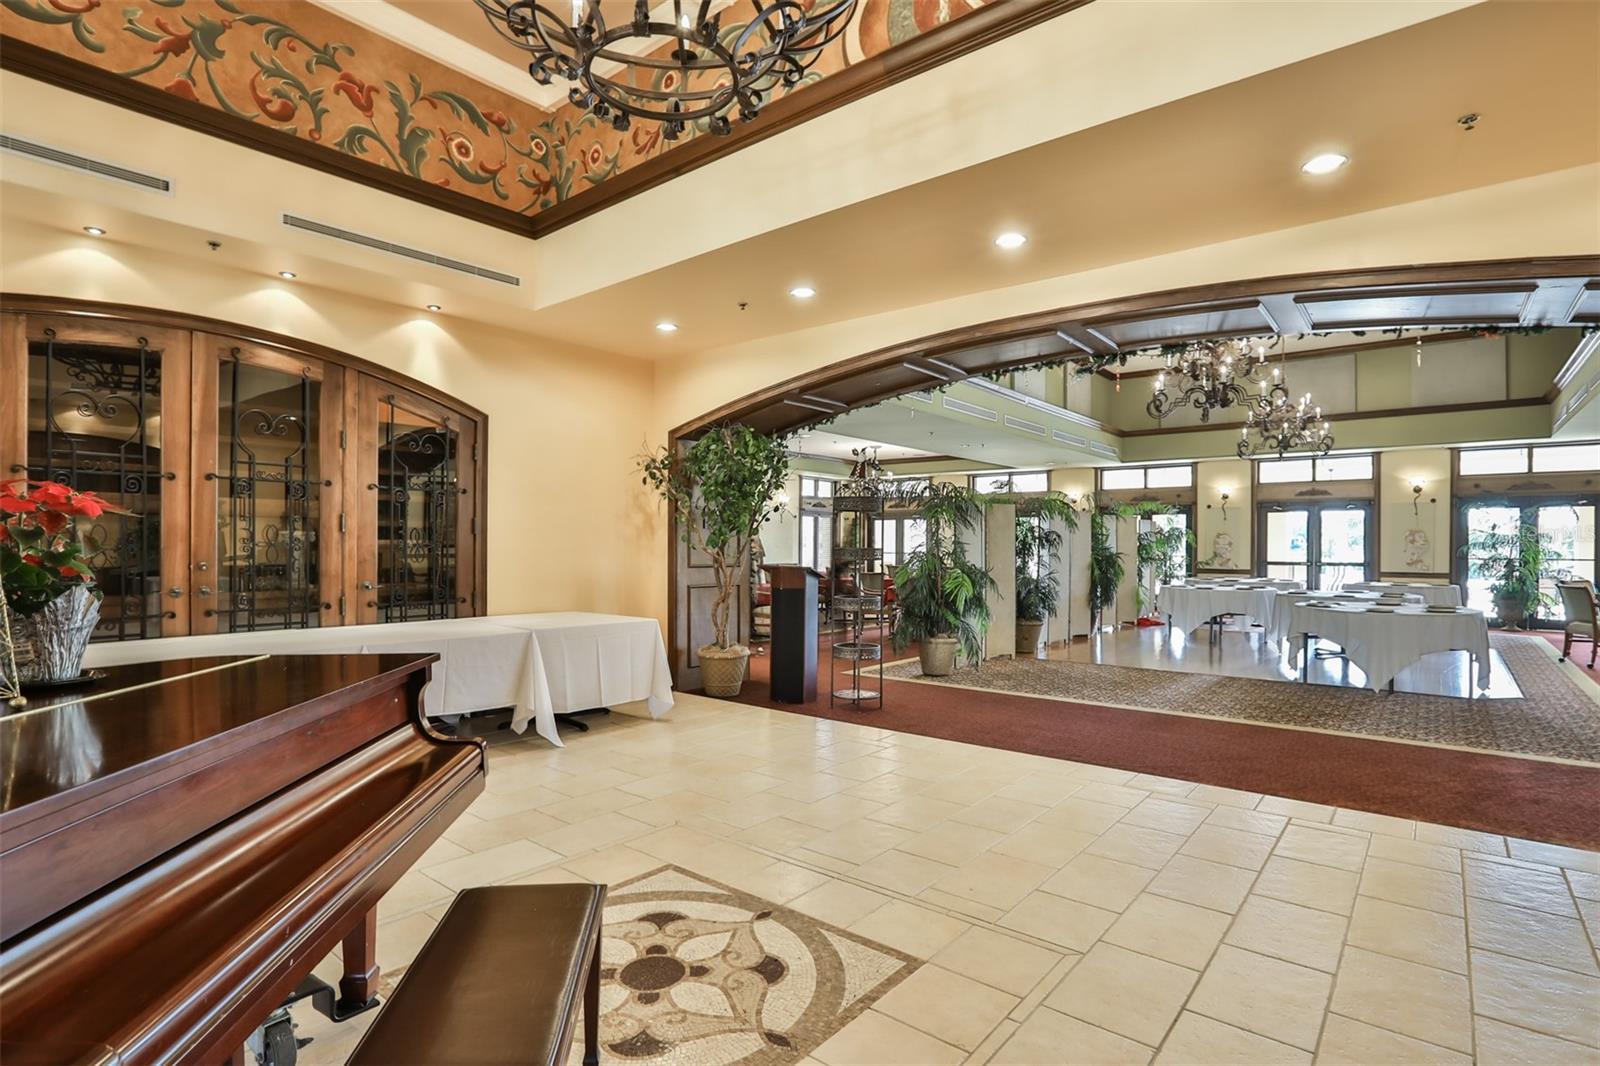 Club Renaissance has entertainment and formal dining events.